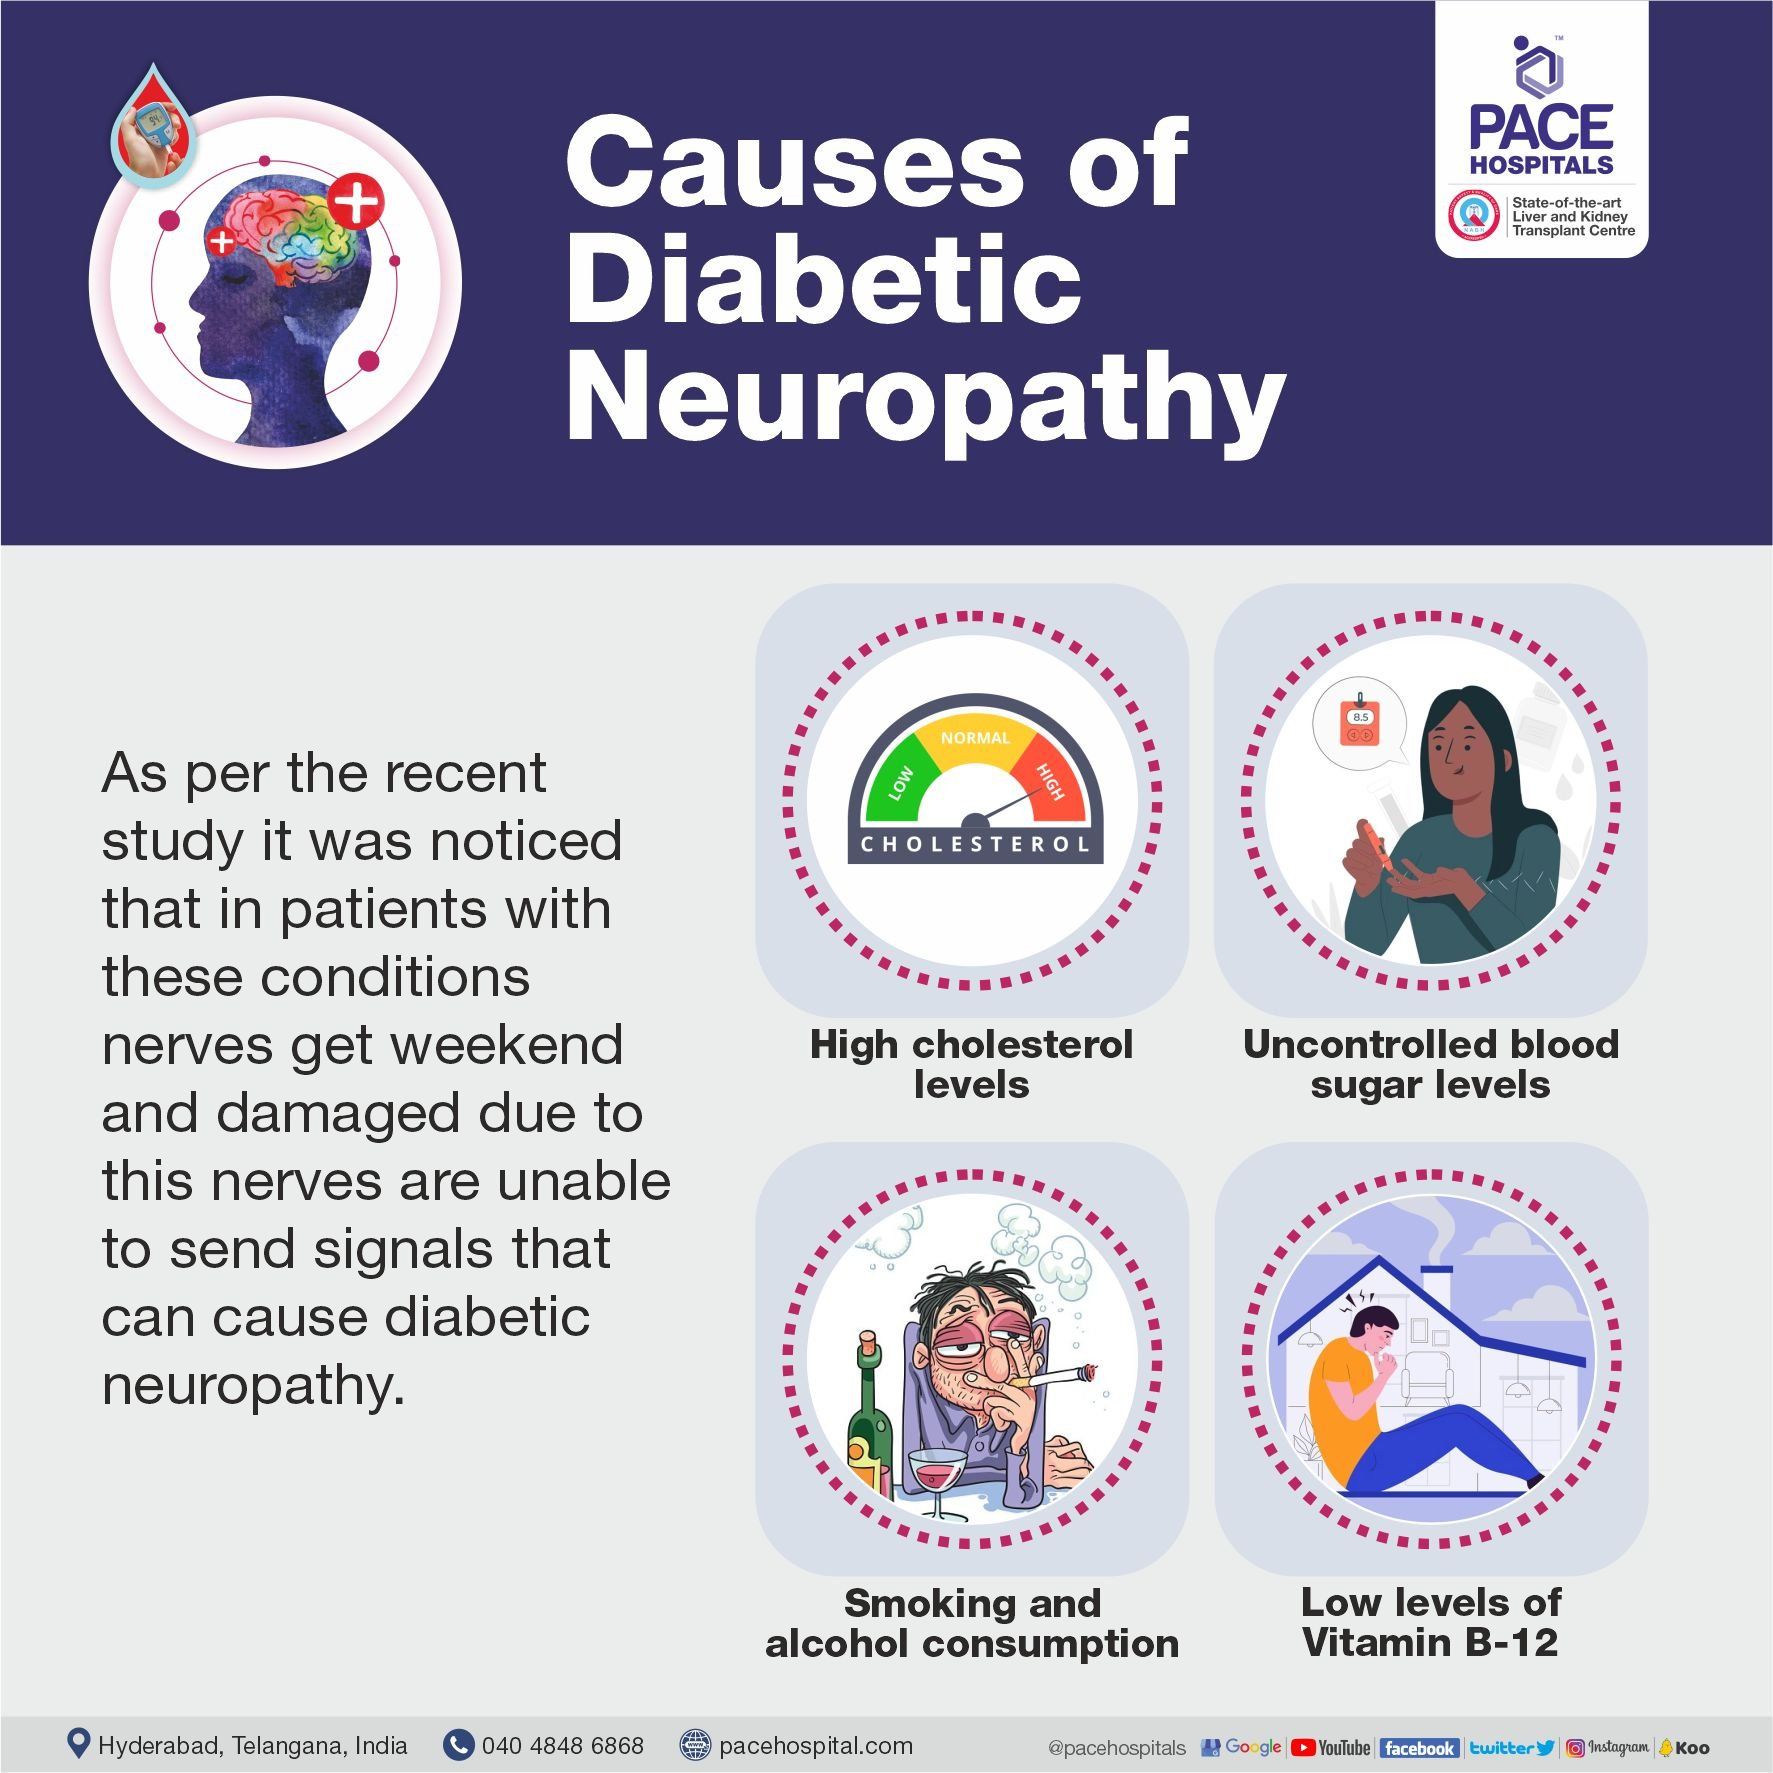 What is the main cause of diabetic neuropathy?